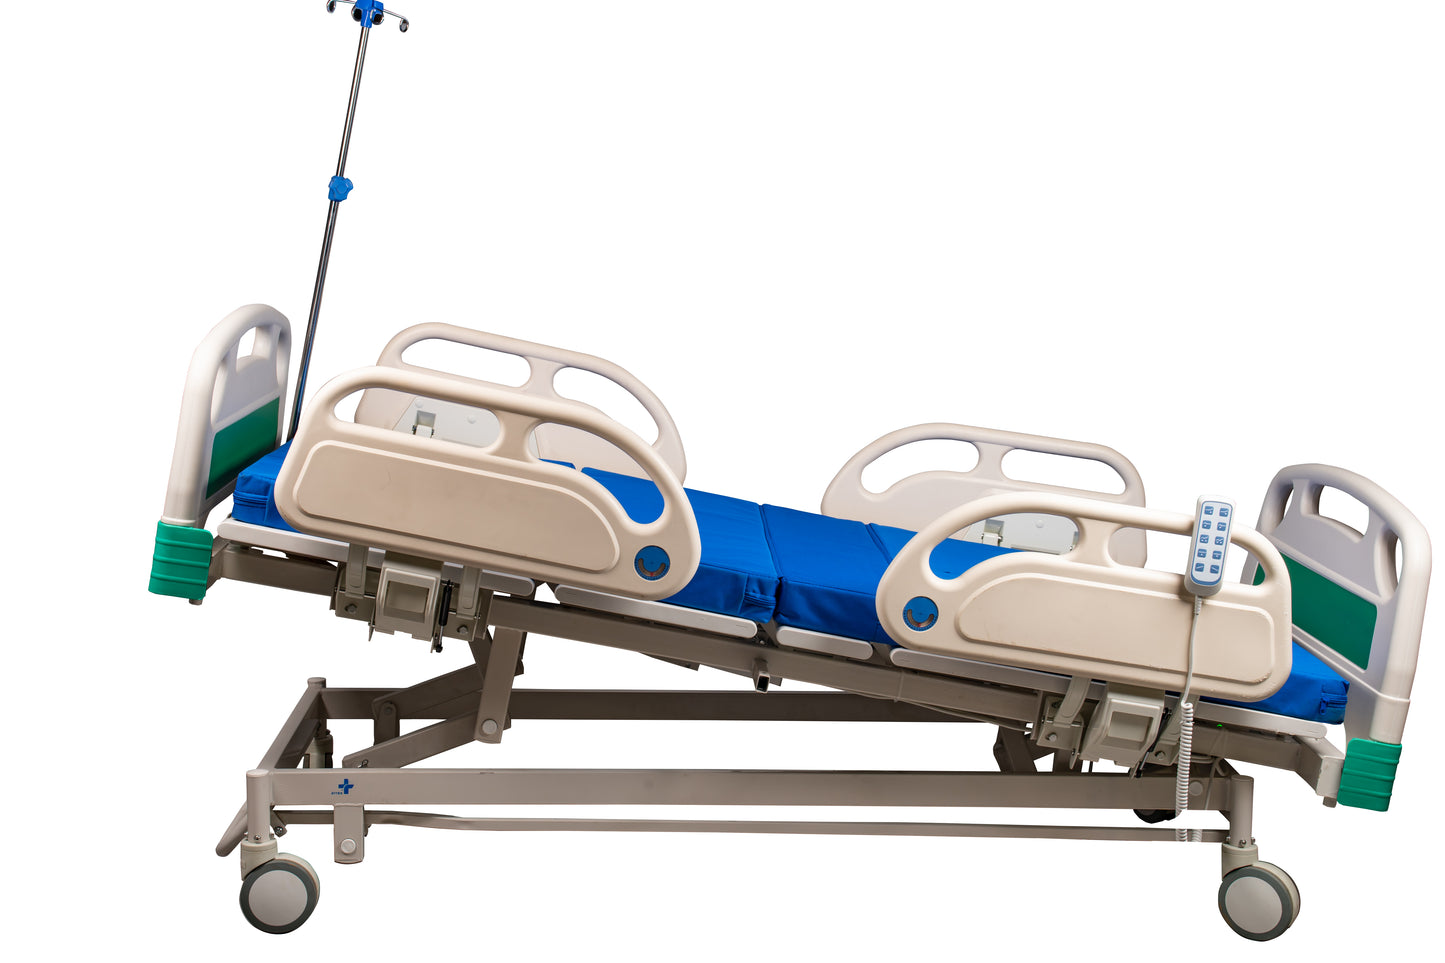 ARREX EXCELSIOR HOSPITAL BED - 5 FUNCTIONS ELECTRONIC BED, REMOTE ADJUSTMENT, INCLUDES MATTRESS, HEAVY-DUTY CASTORS WITH BRAKES